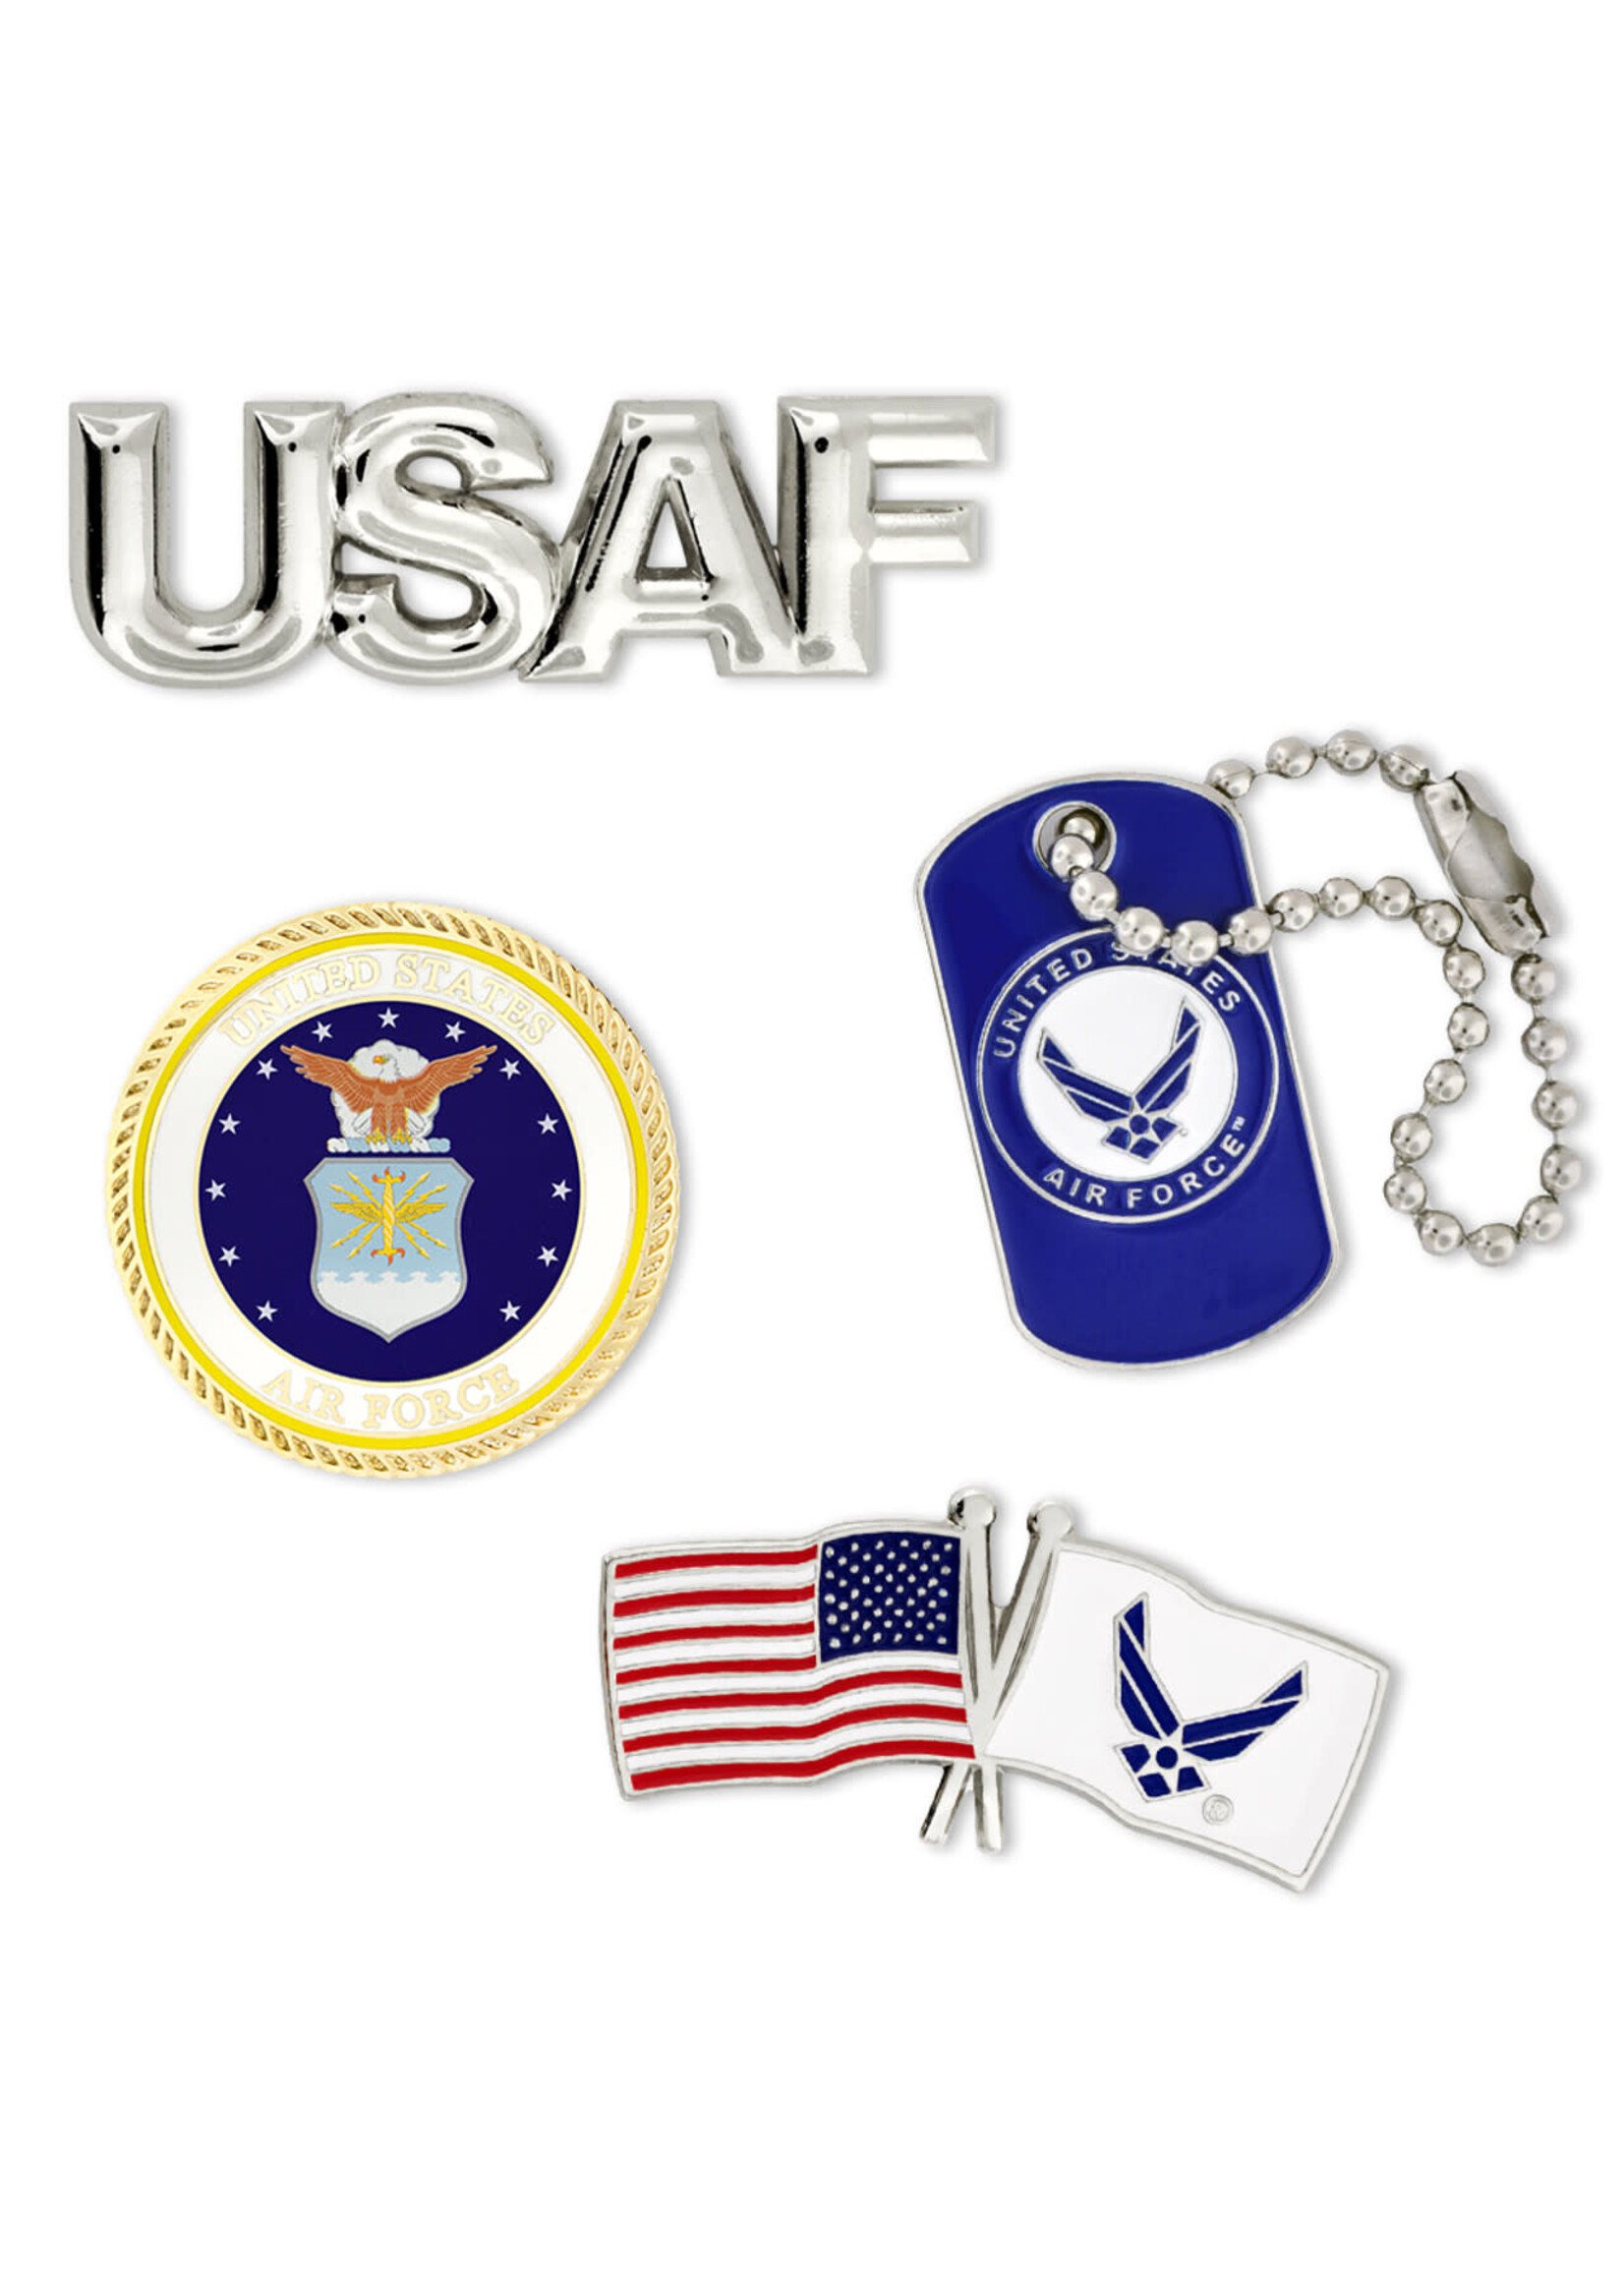 Officially Licensed U.S. Air Force 4-Pin Set